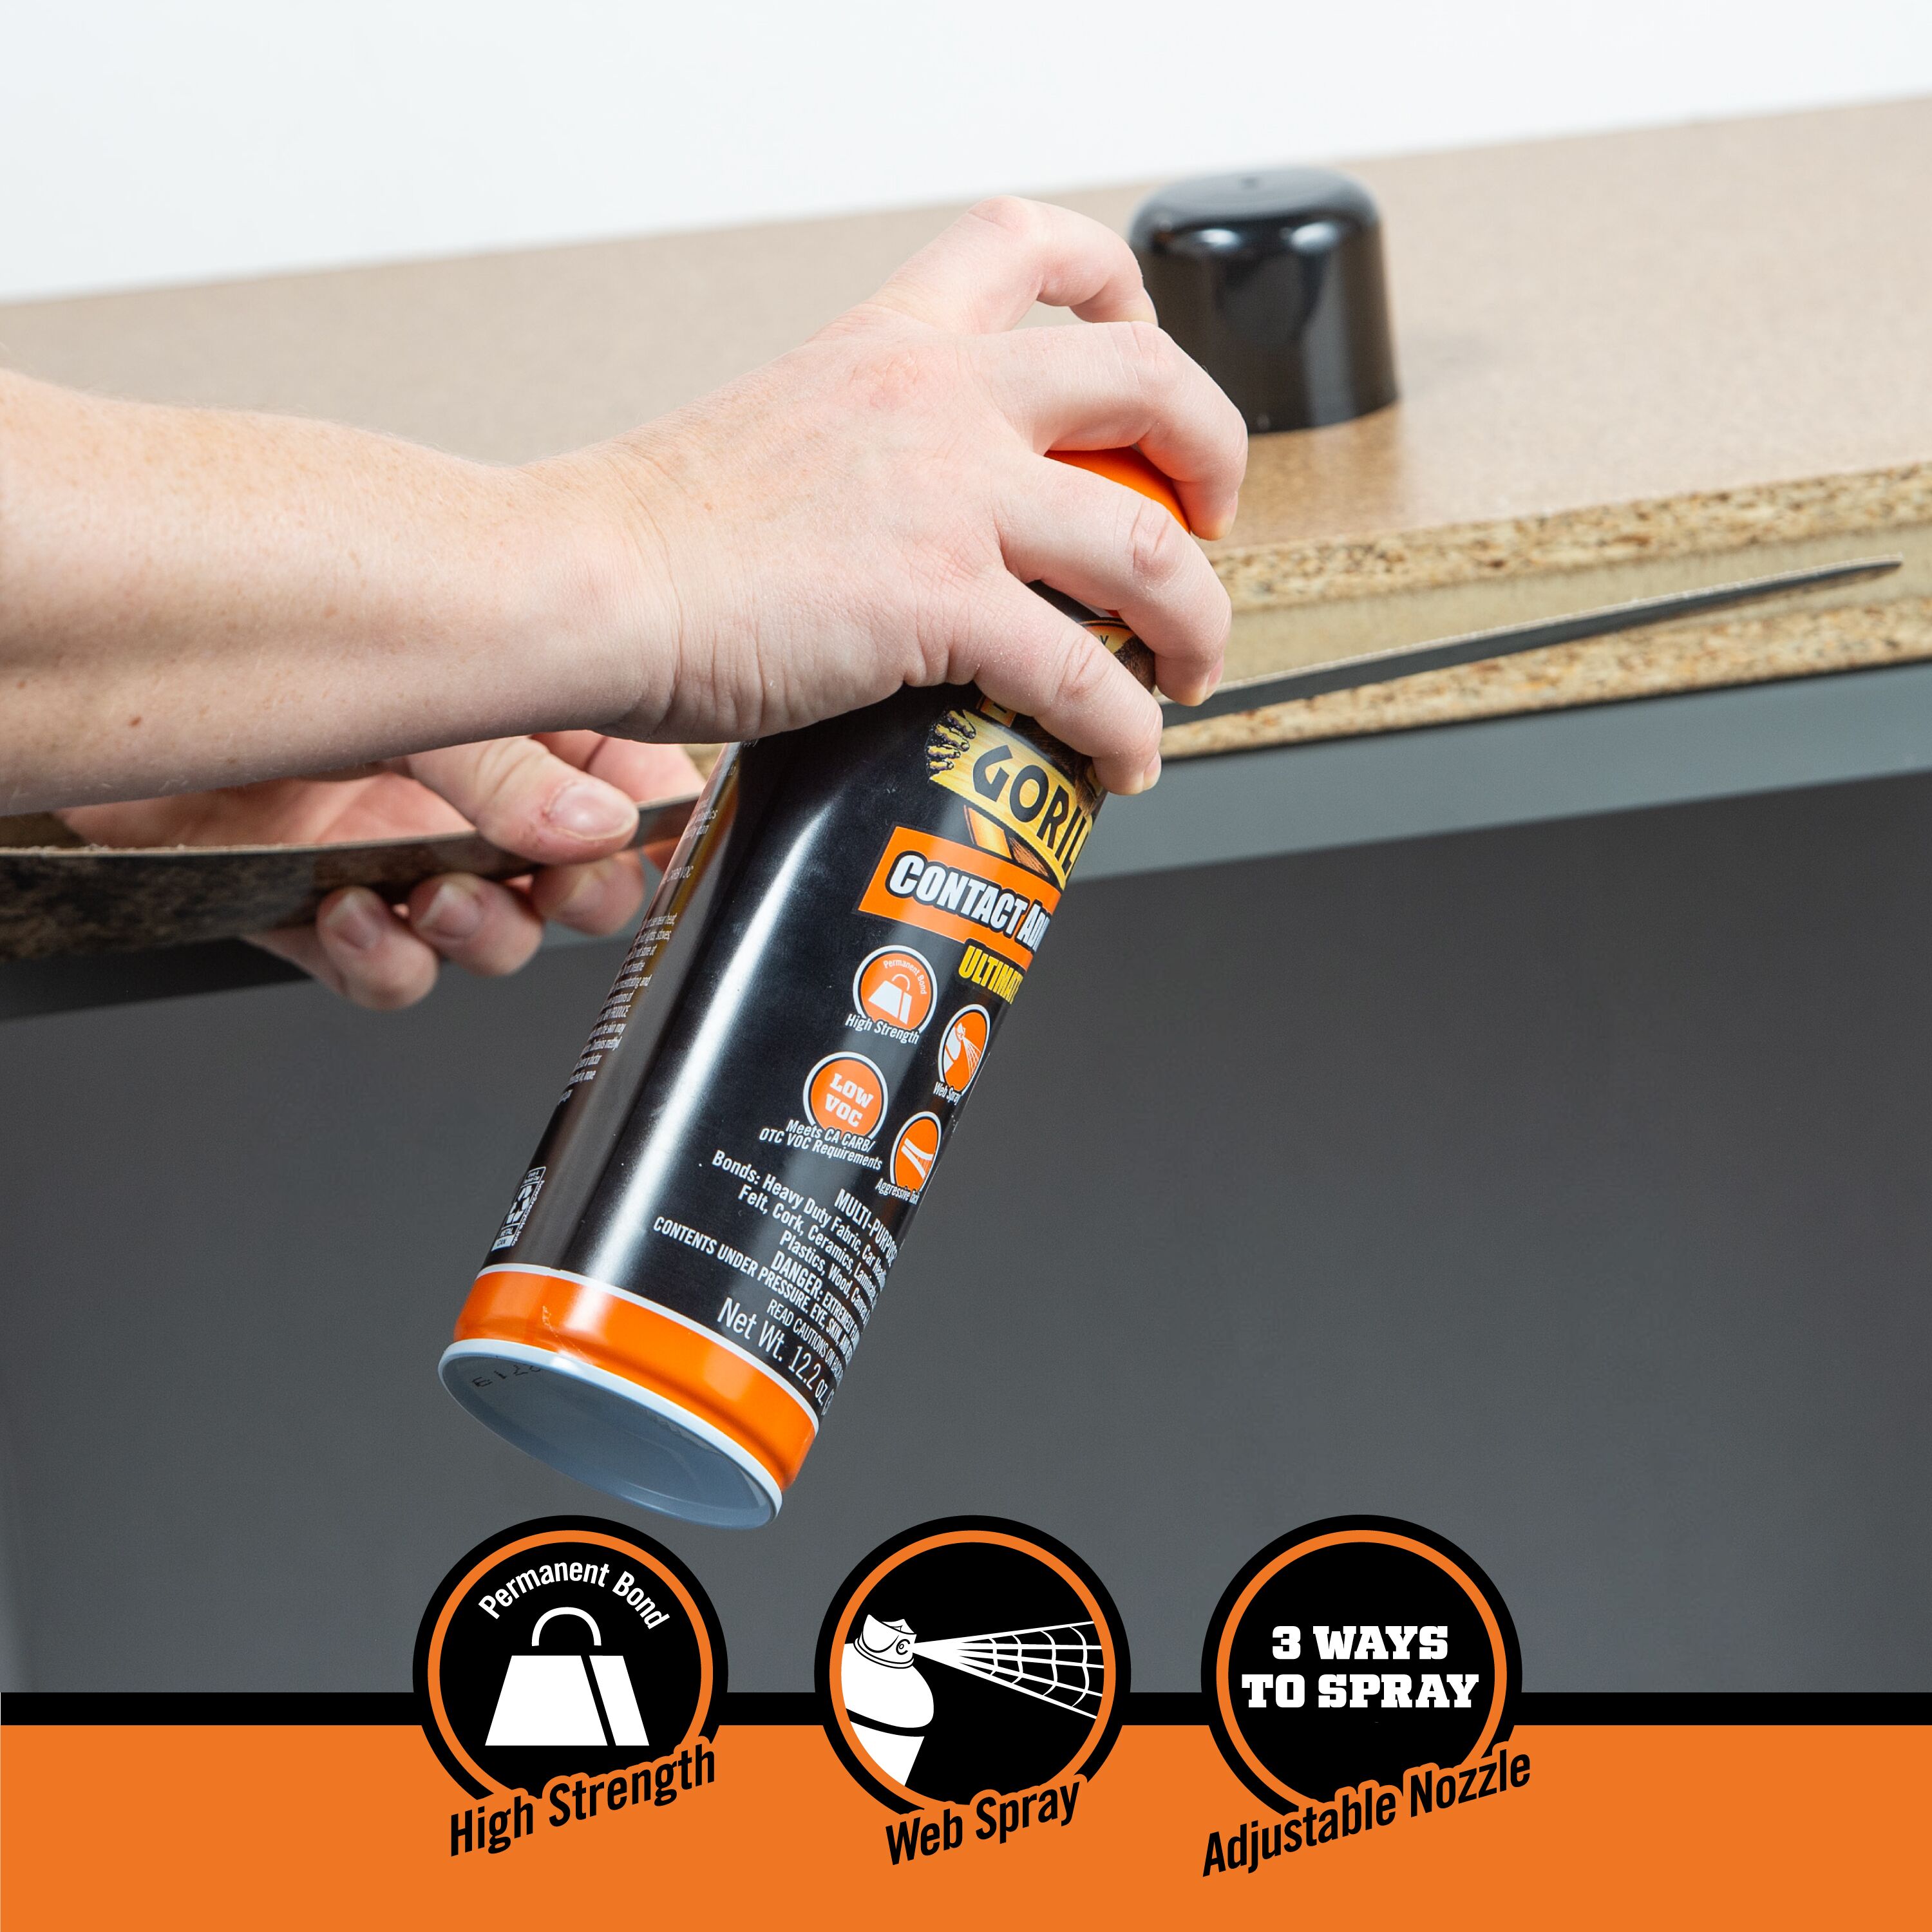 Gorilla Glue Adhesive Spray, Gorilla Spray Adhesive is heavy duty,  multi-purpose and easy to use. It forms a clear permanent bond, and is  moisture resistant making it ideal for